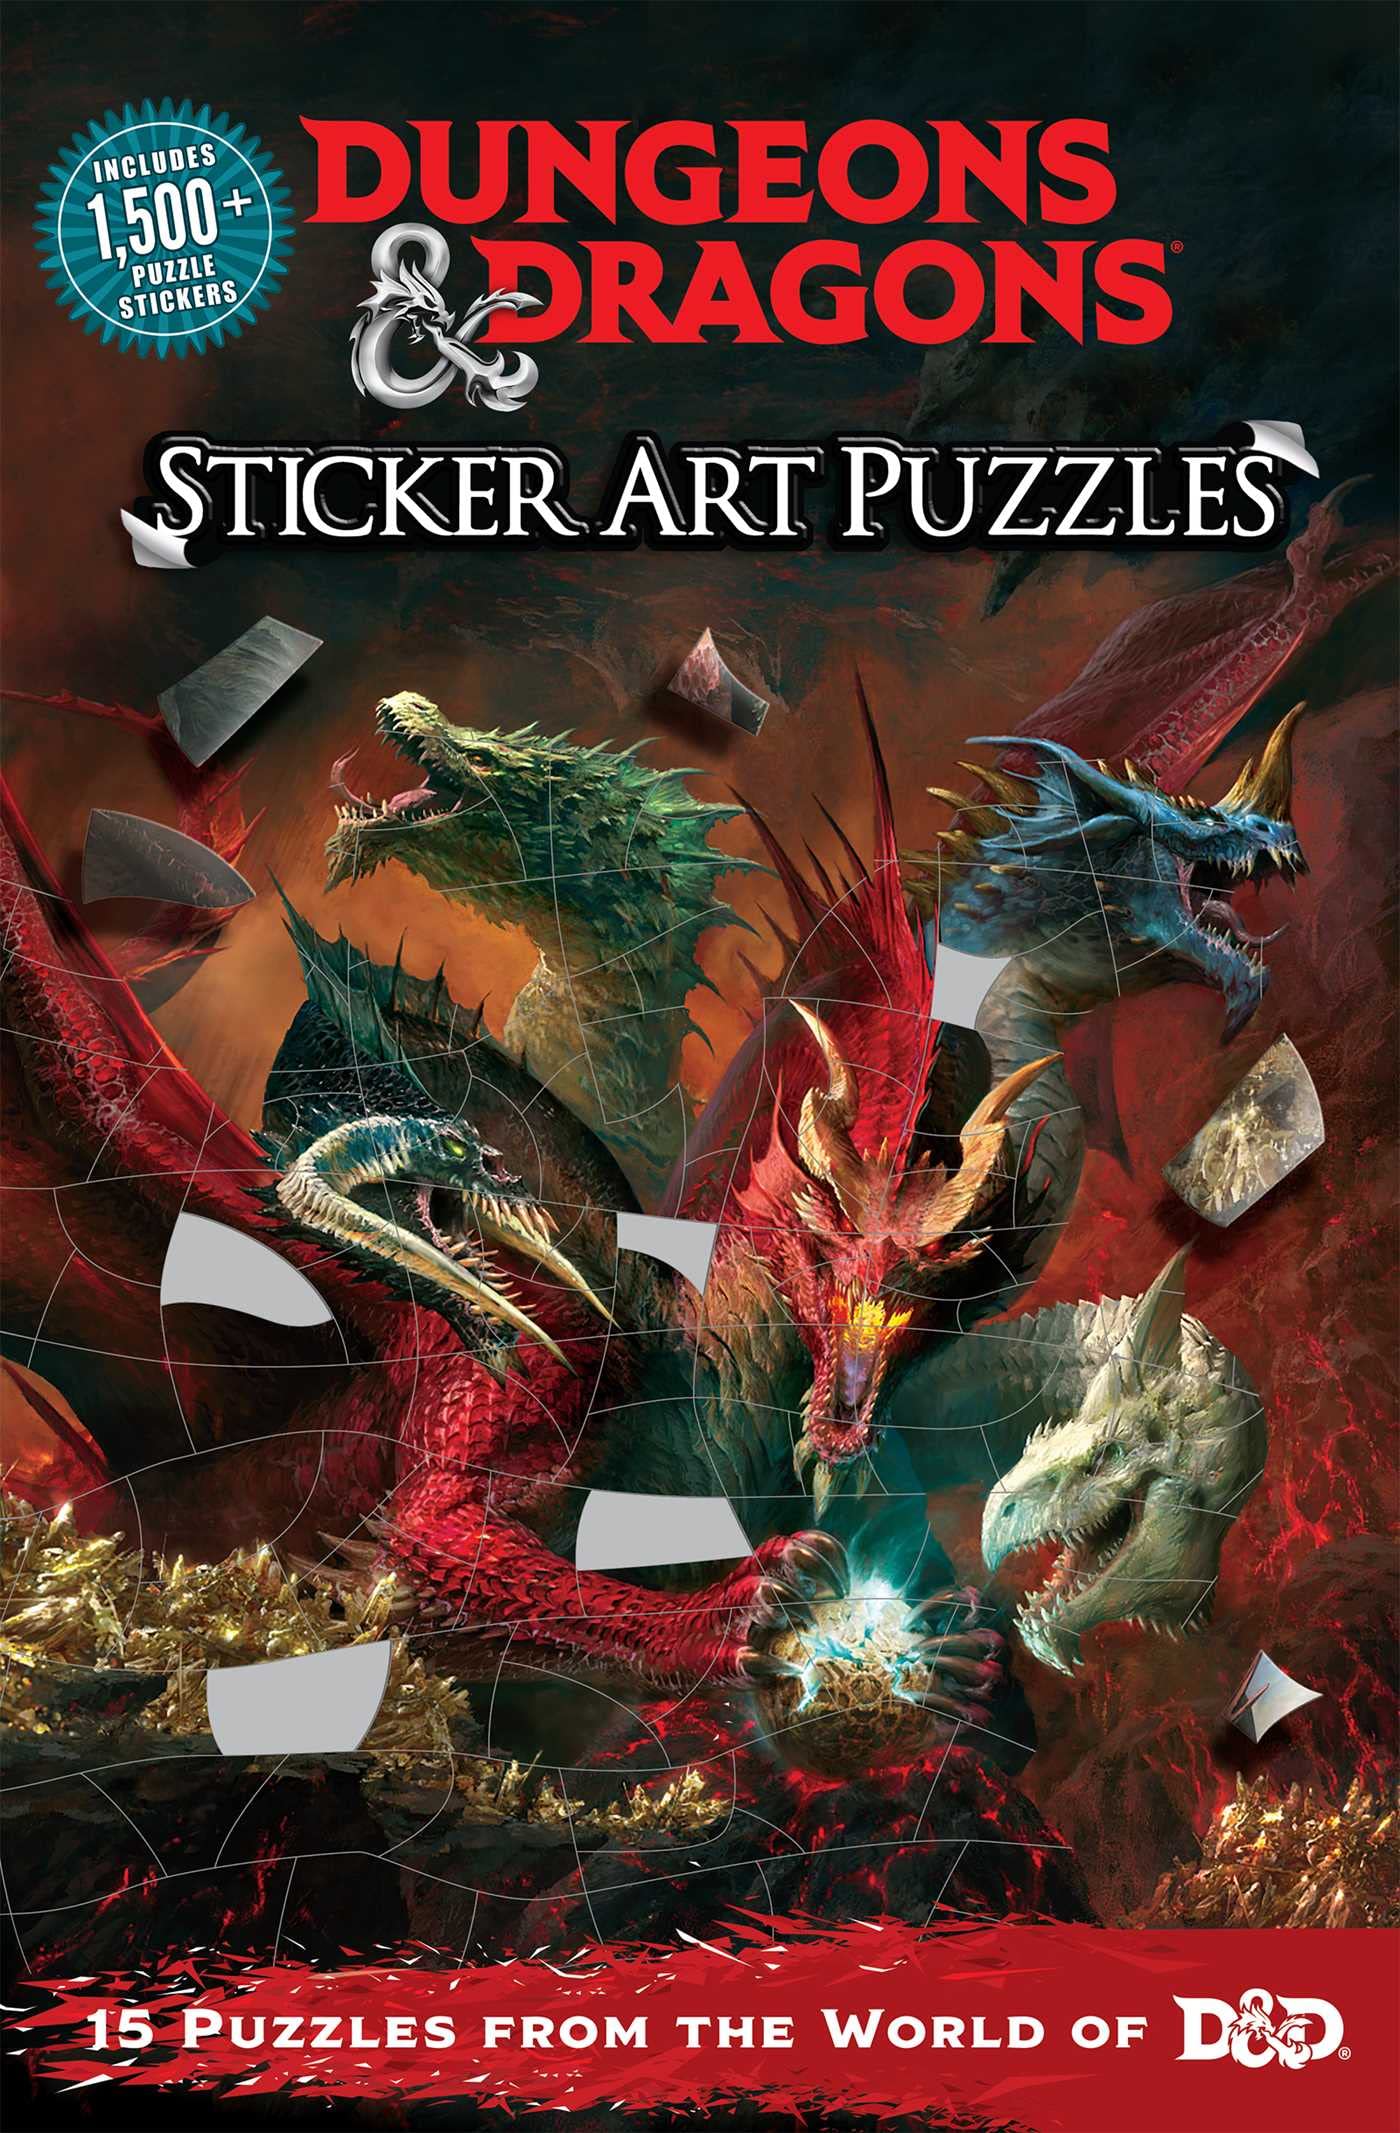 D&D Sticker book cover showing dramatic dragons